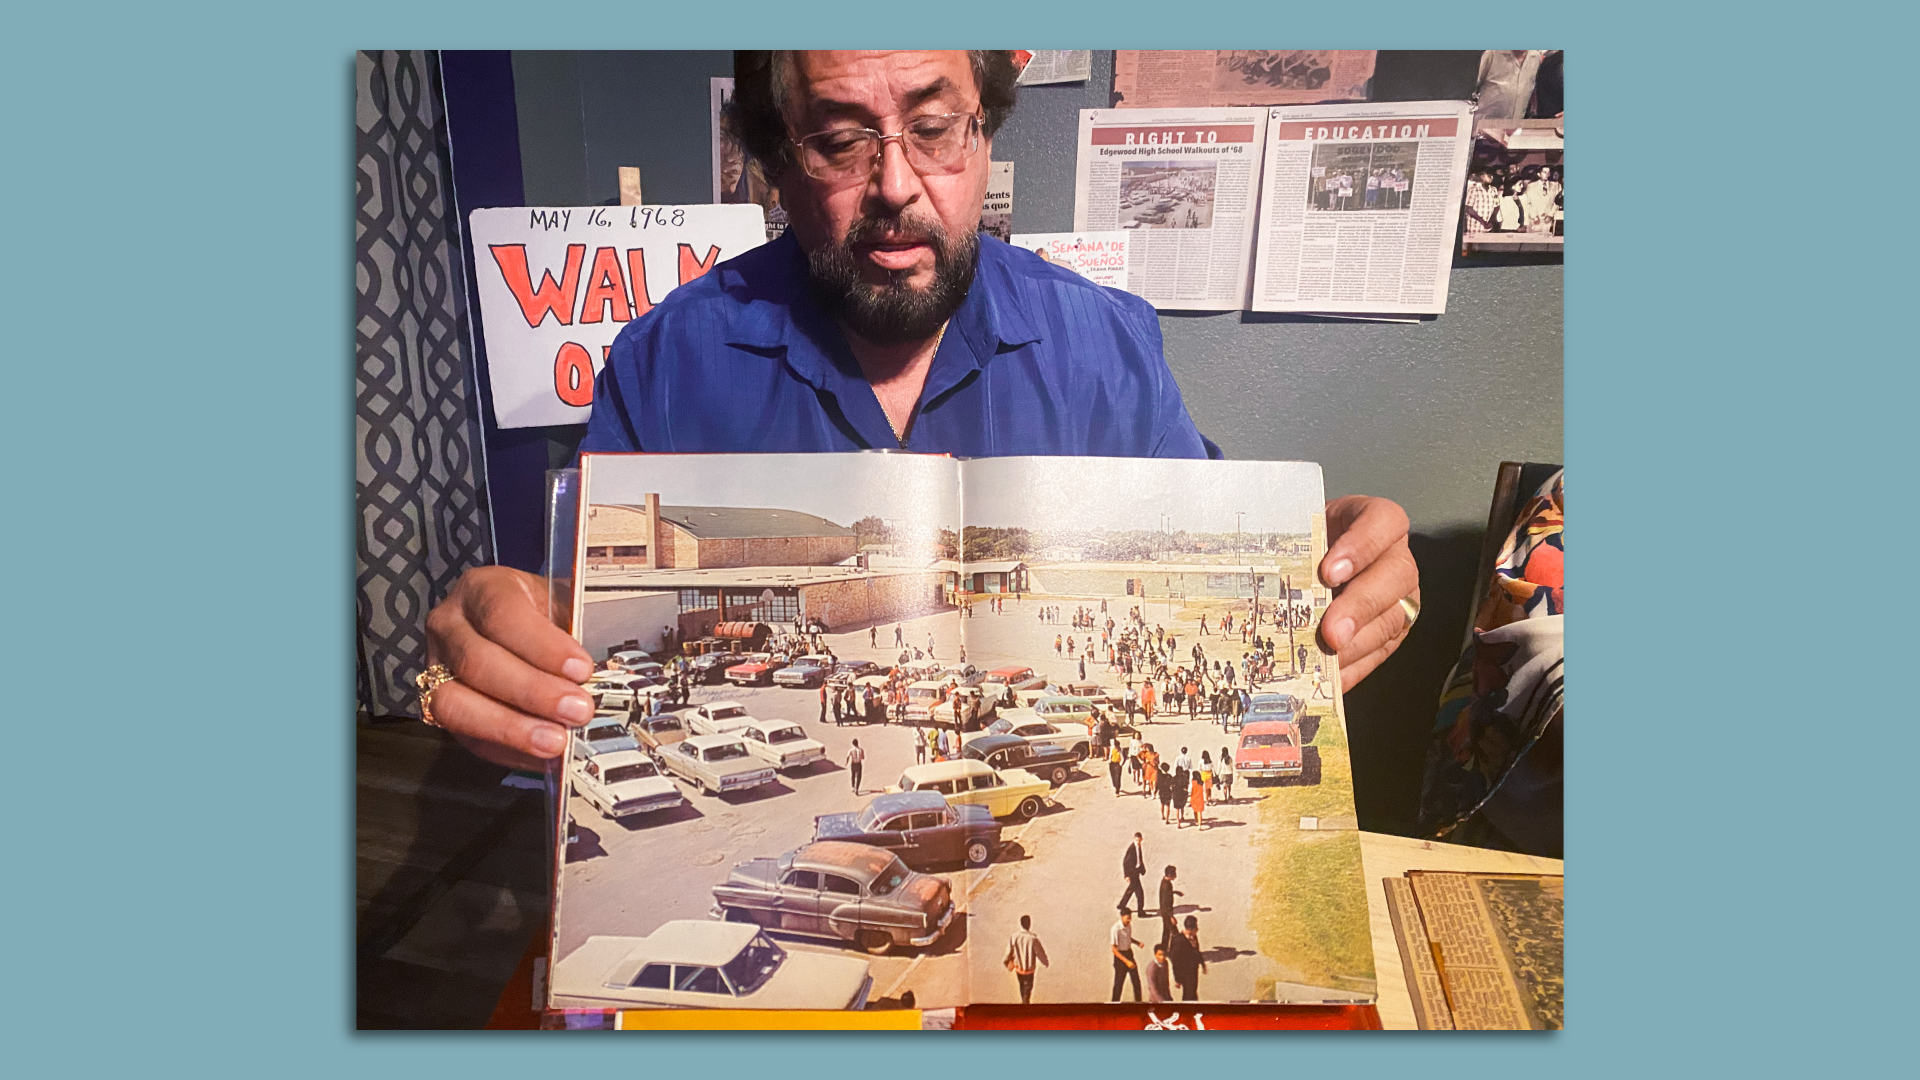 Richard Herrera holds open a 1960s yearbook showing a full spread photo of the Edgewood High School parking lot. 